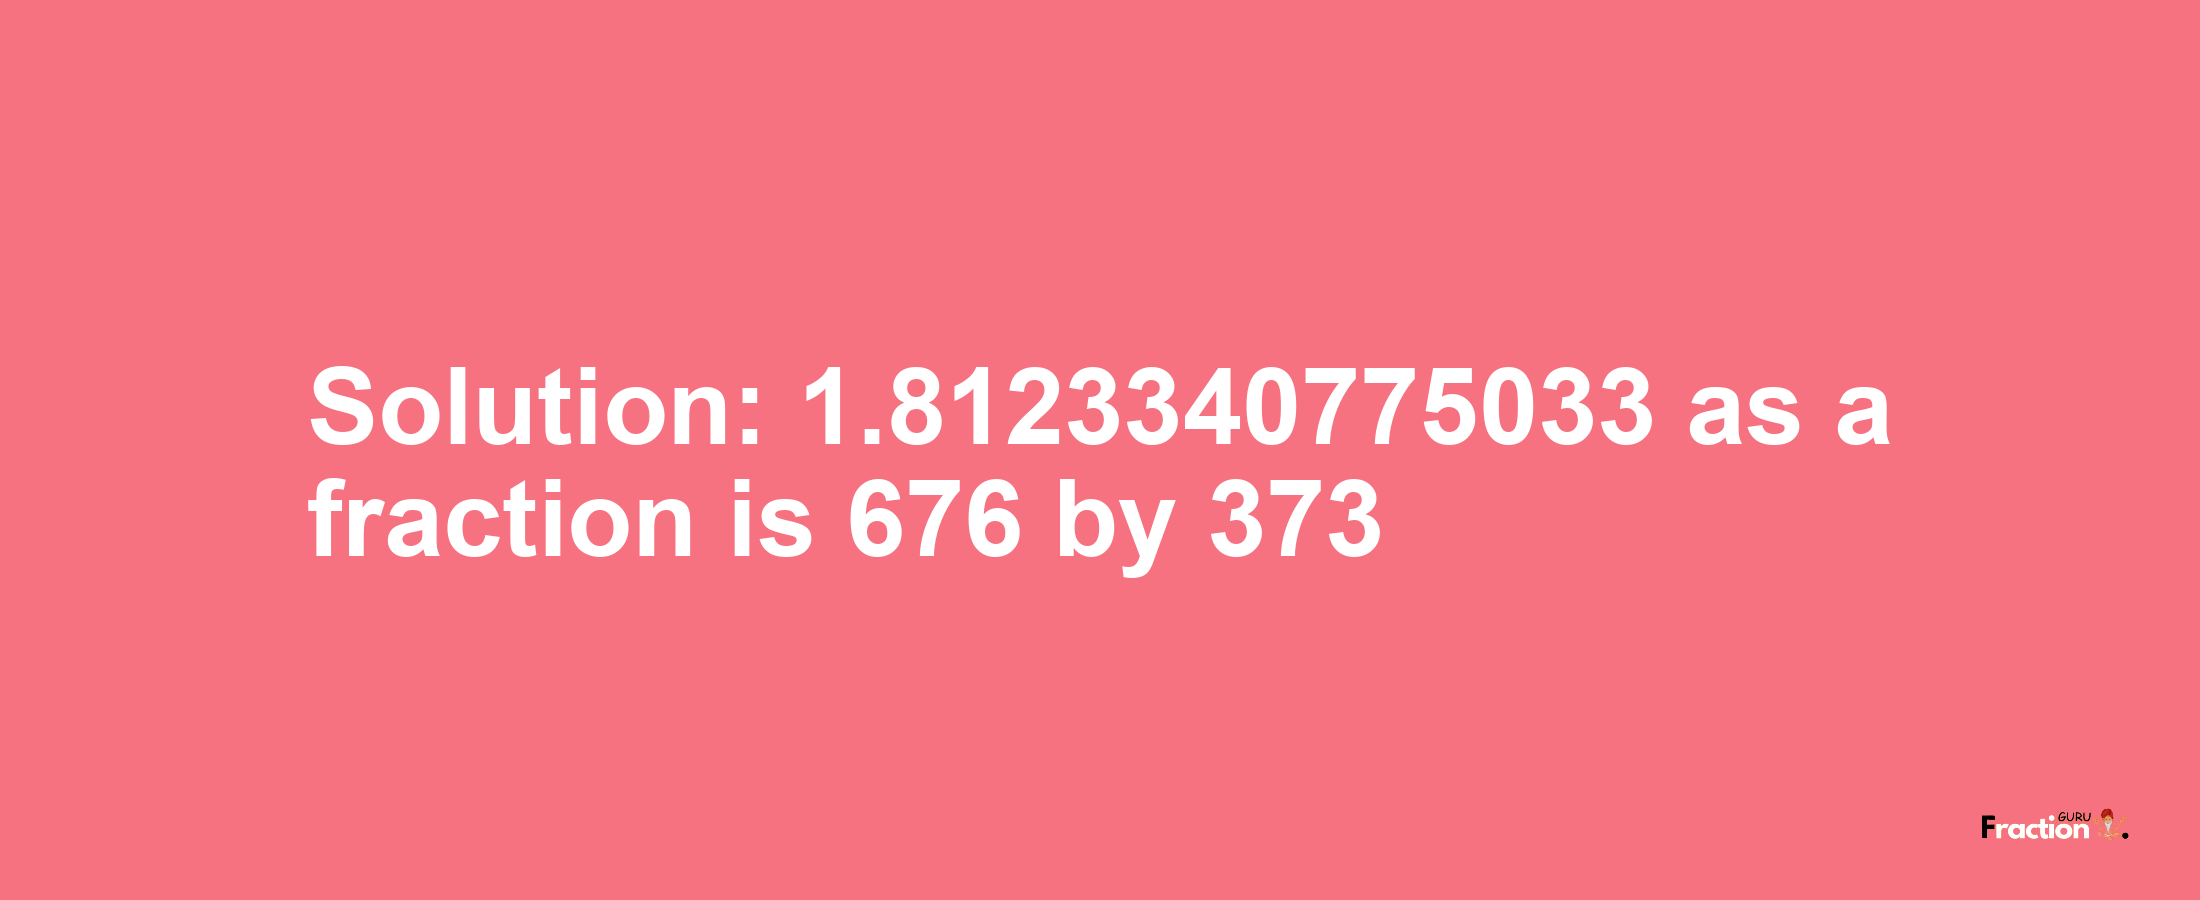 Solution:1.8123340775033 as a fraction is 676/373